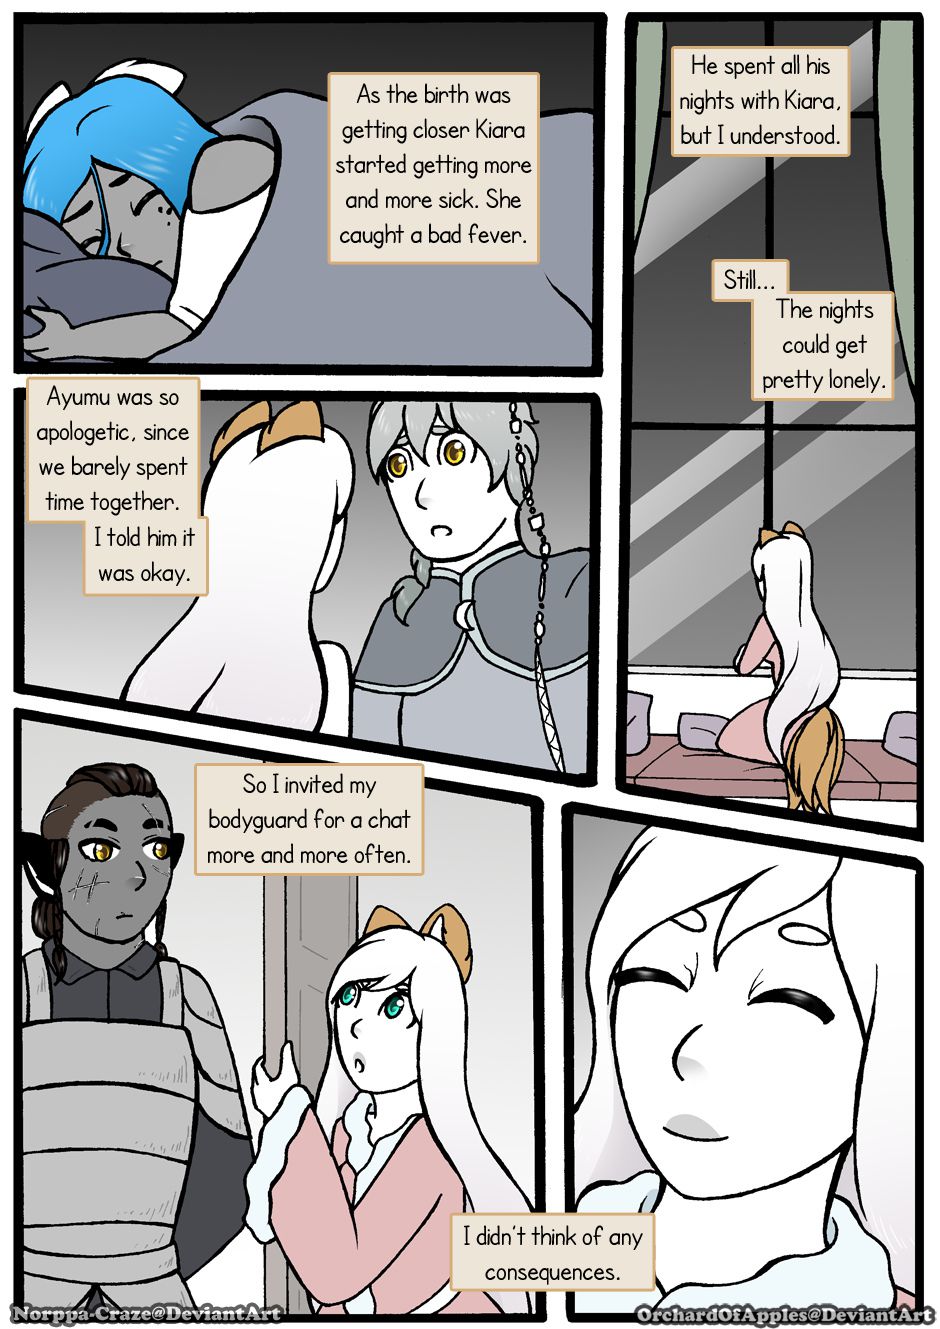 [Jeny-jen94] Between Kings and Queens [Ongoing] 312